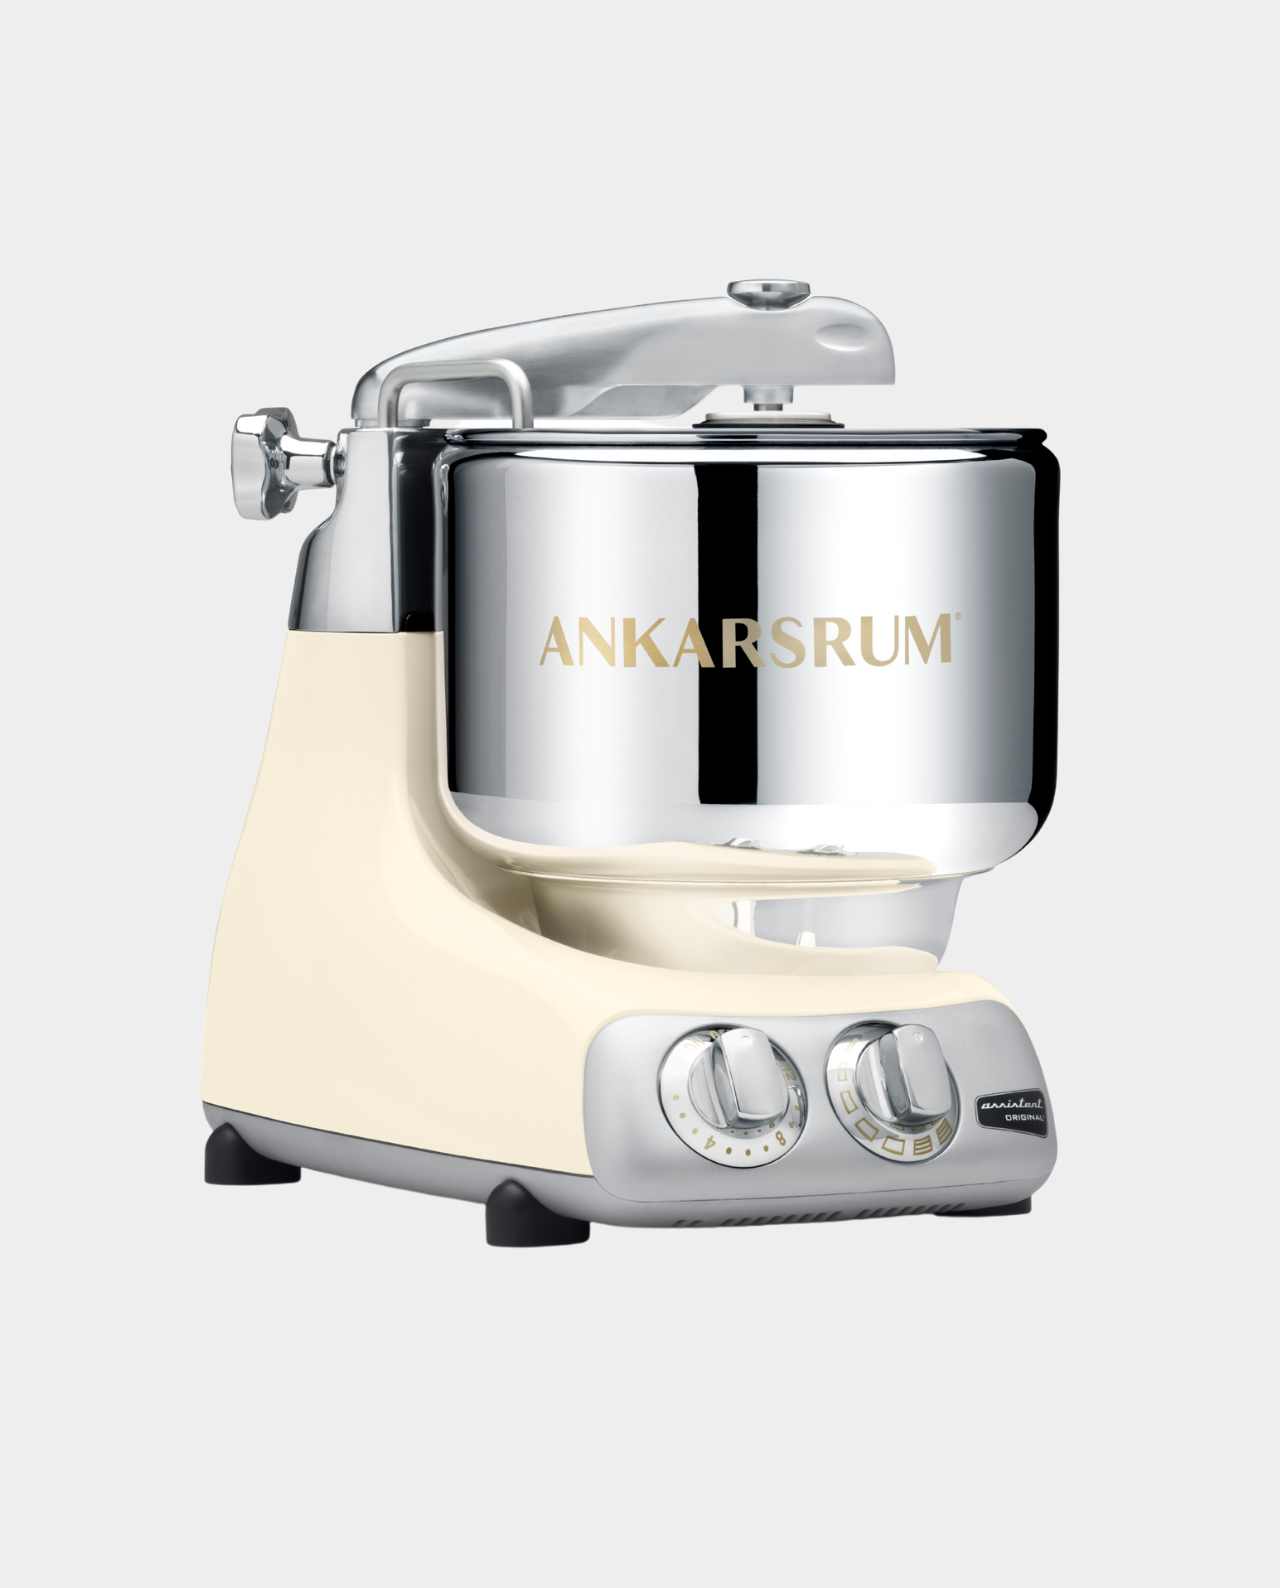 ANKARSRUM AKM6230RB stand mixer in royal blue color - 1500W